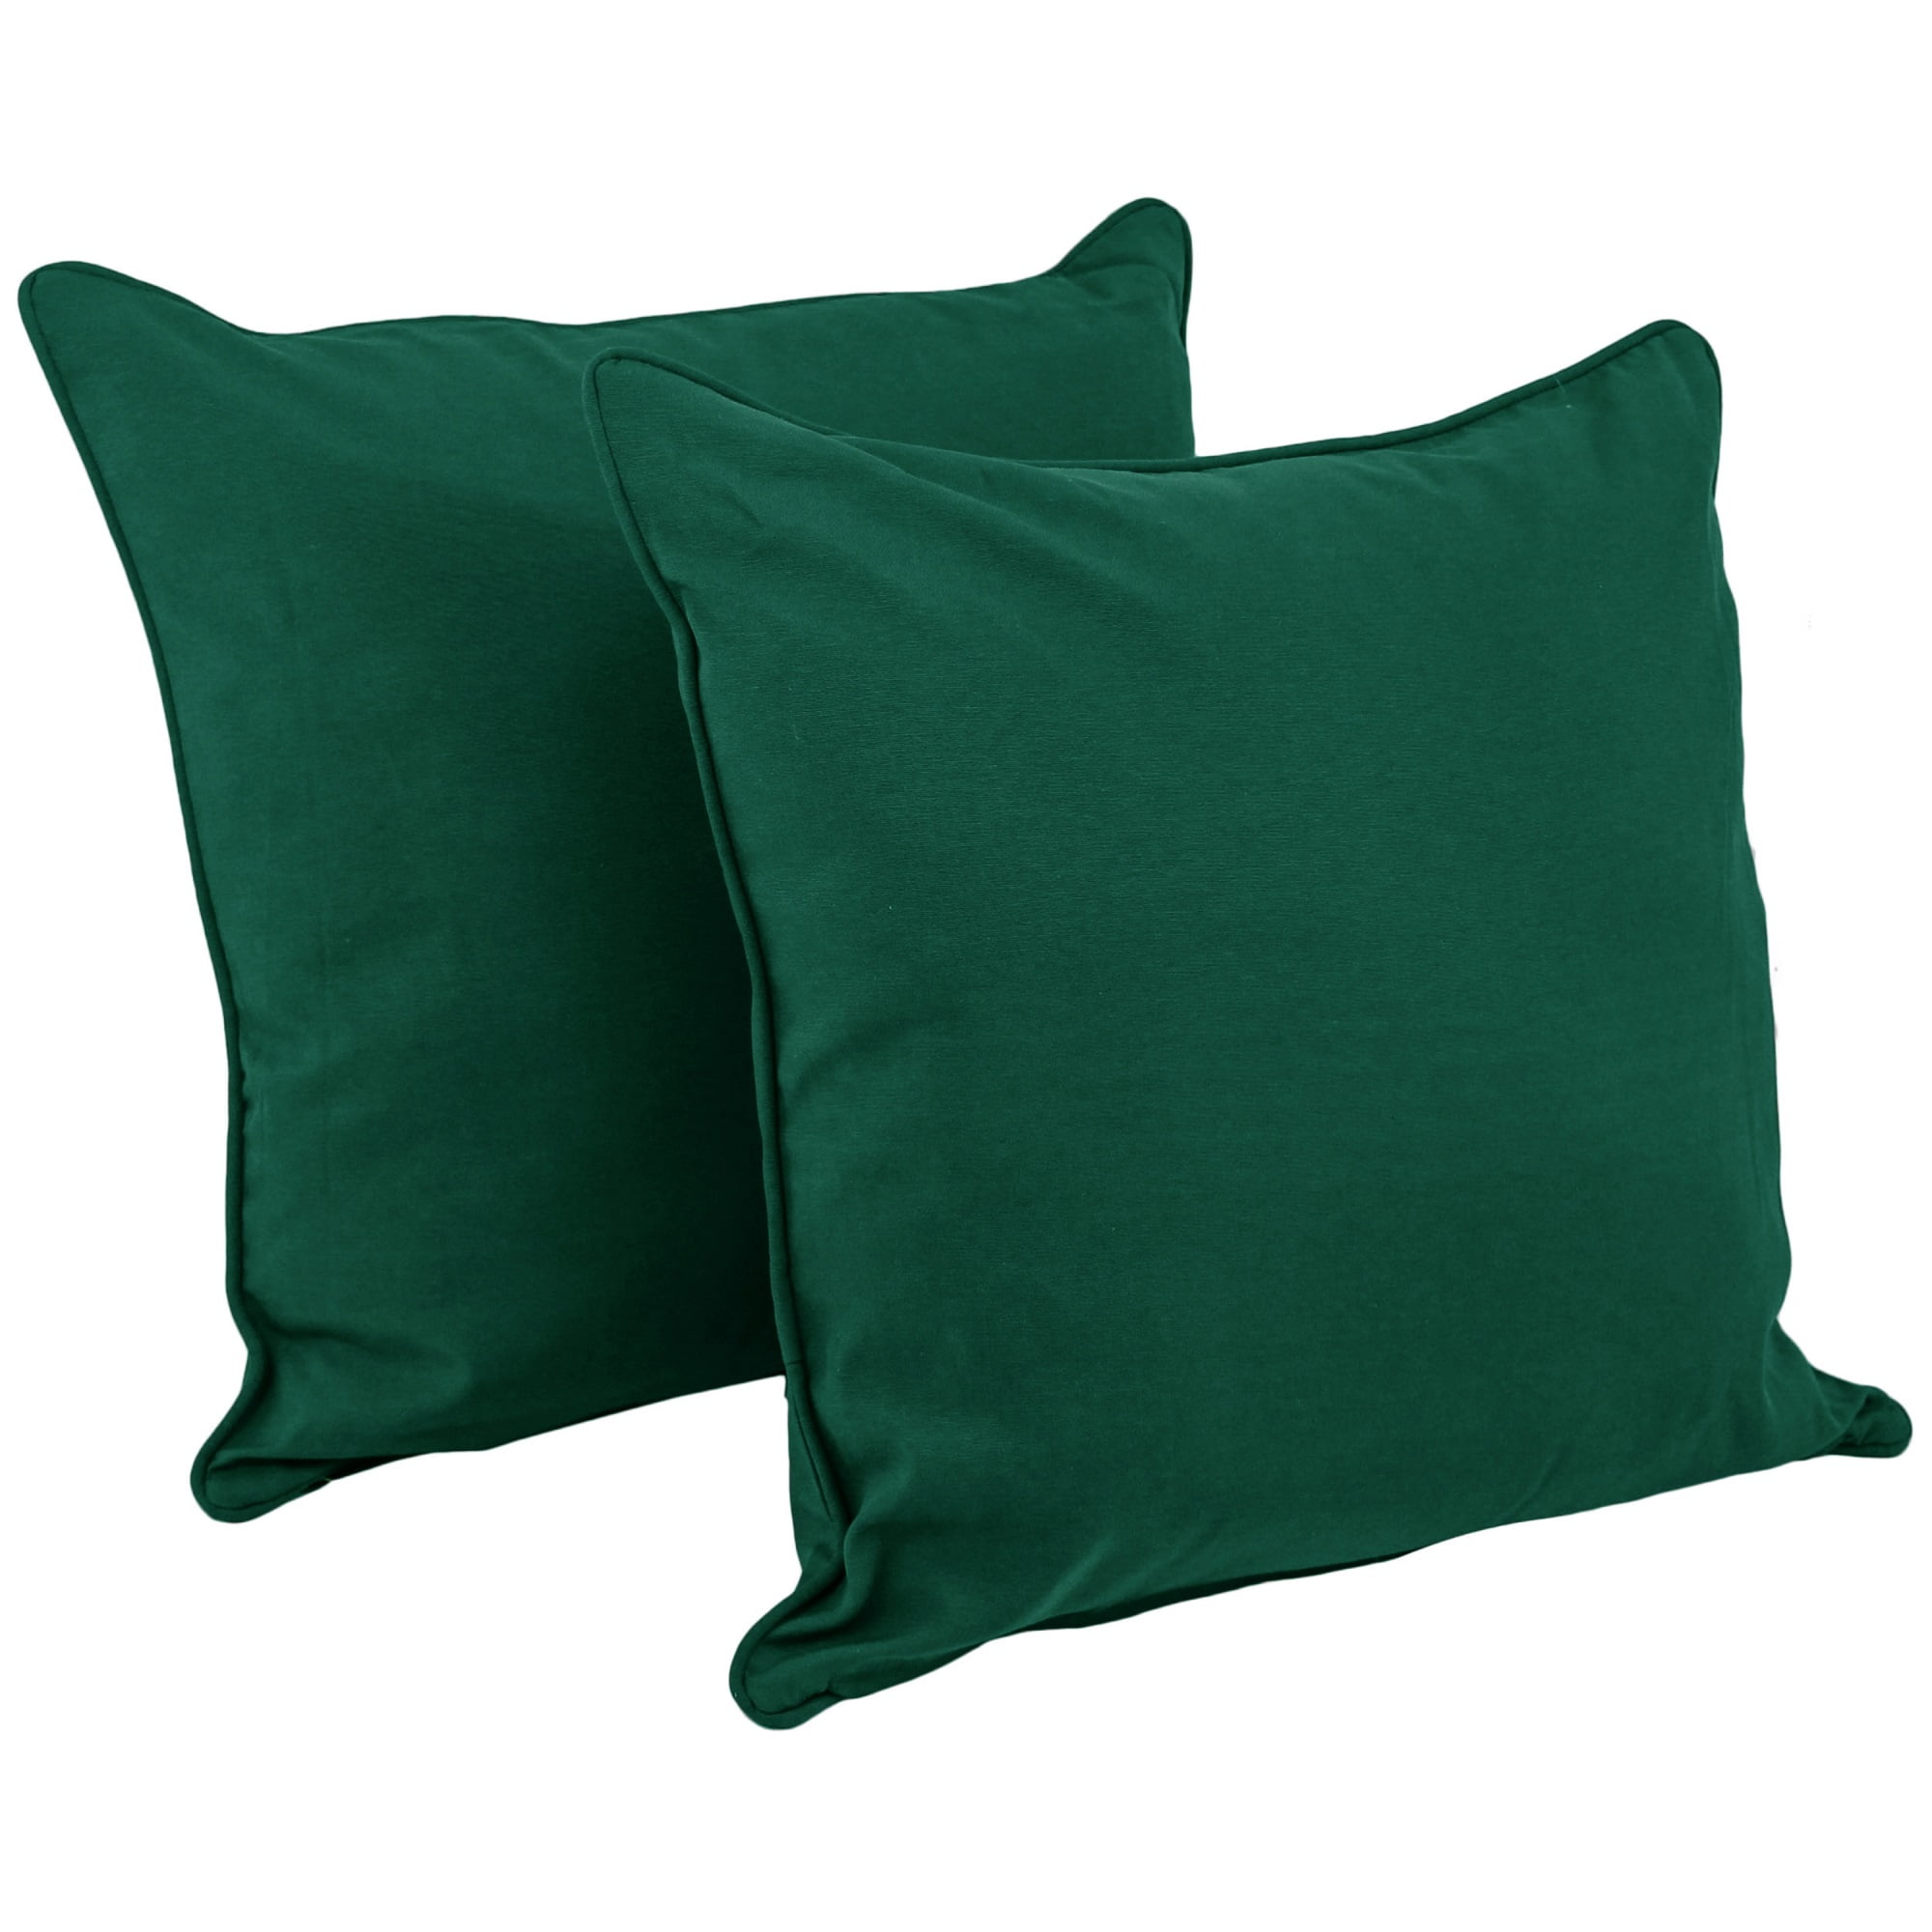 Picture of Blazing Needles 9813-CD-S2-TW-FG 25 in. Double-Corded Solid Twill Square Floor Pillows with Inserts, Forest Green - Set of 2